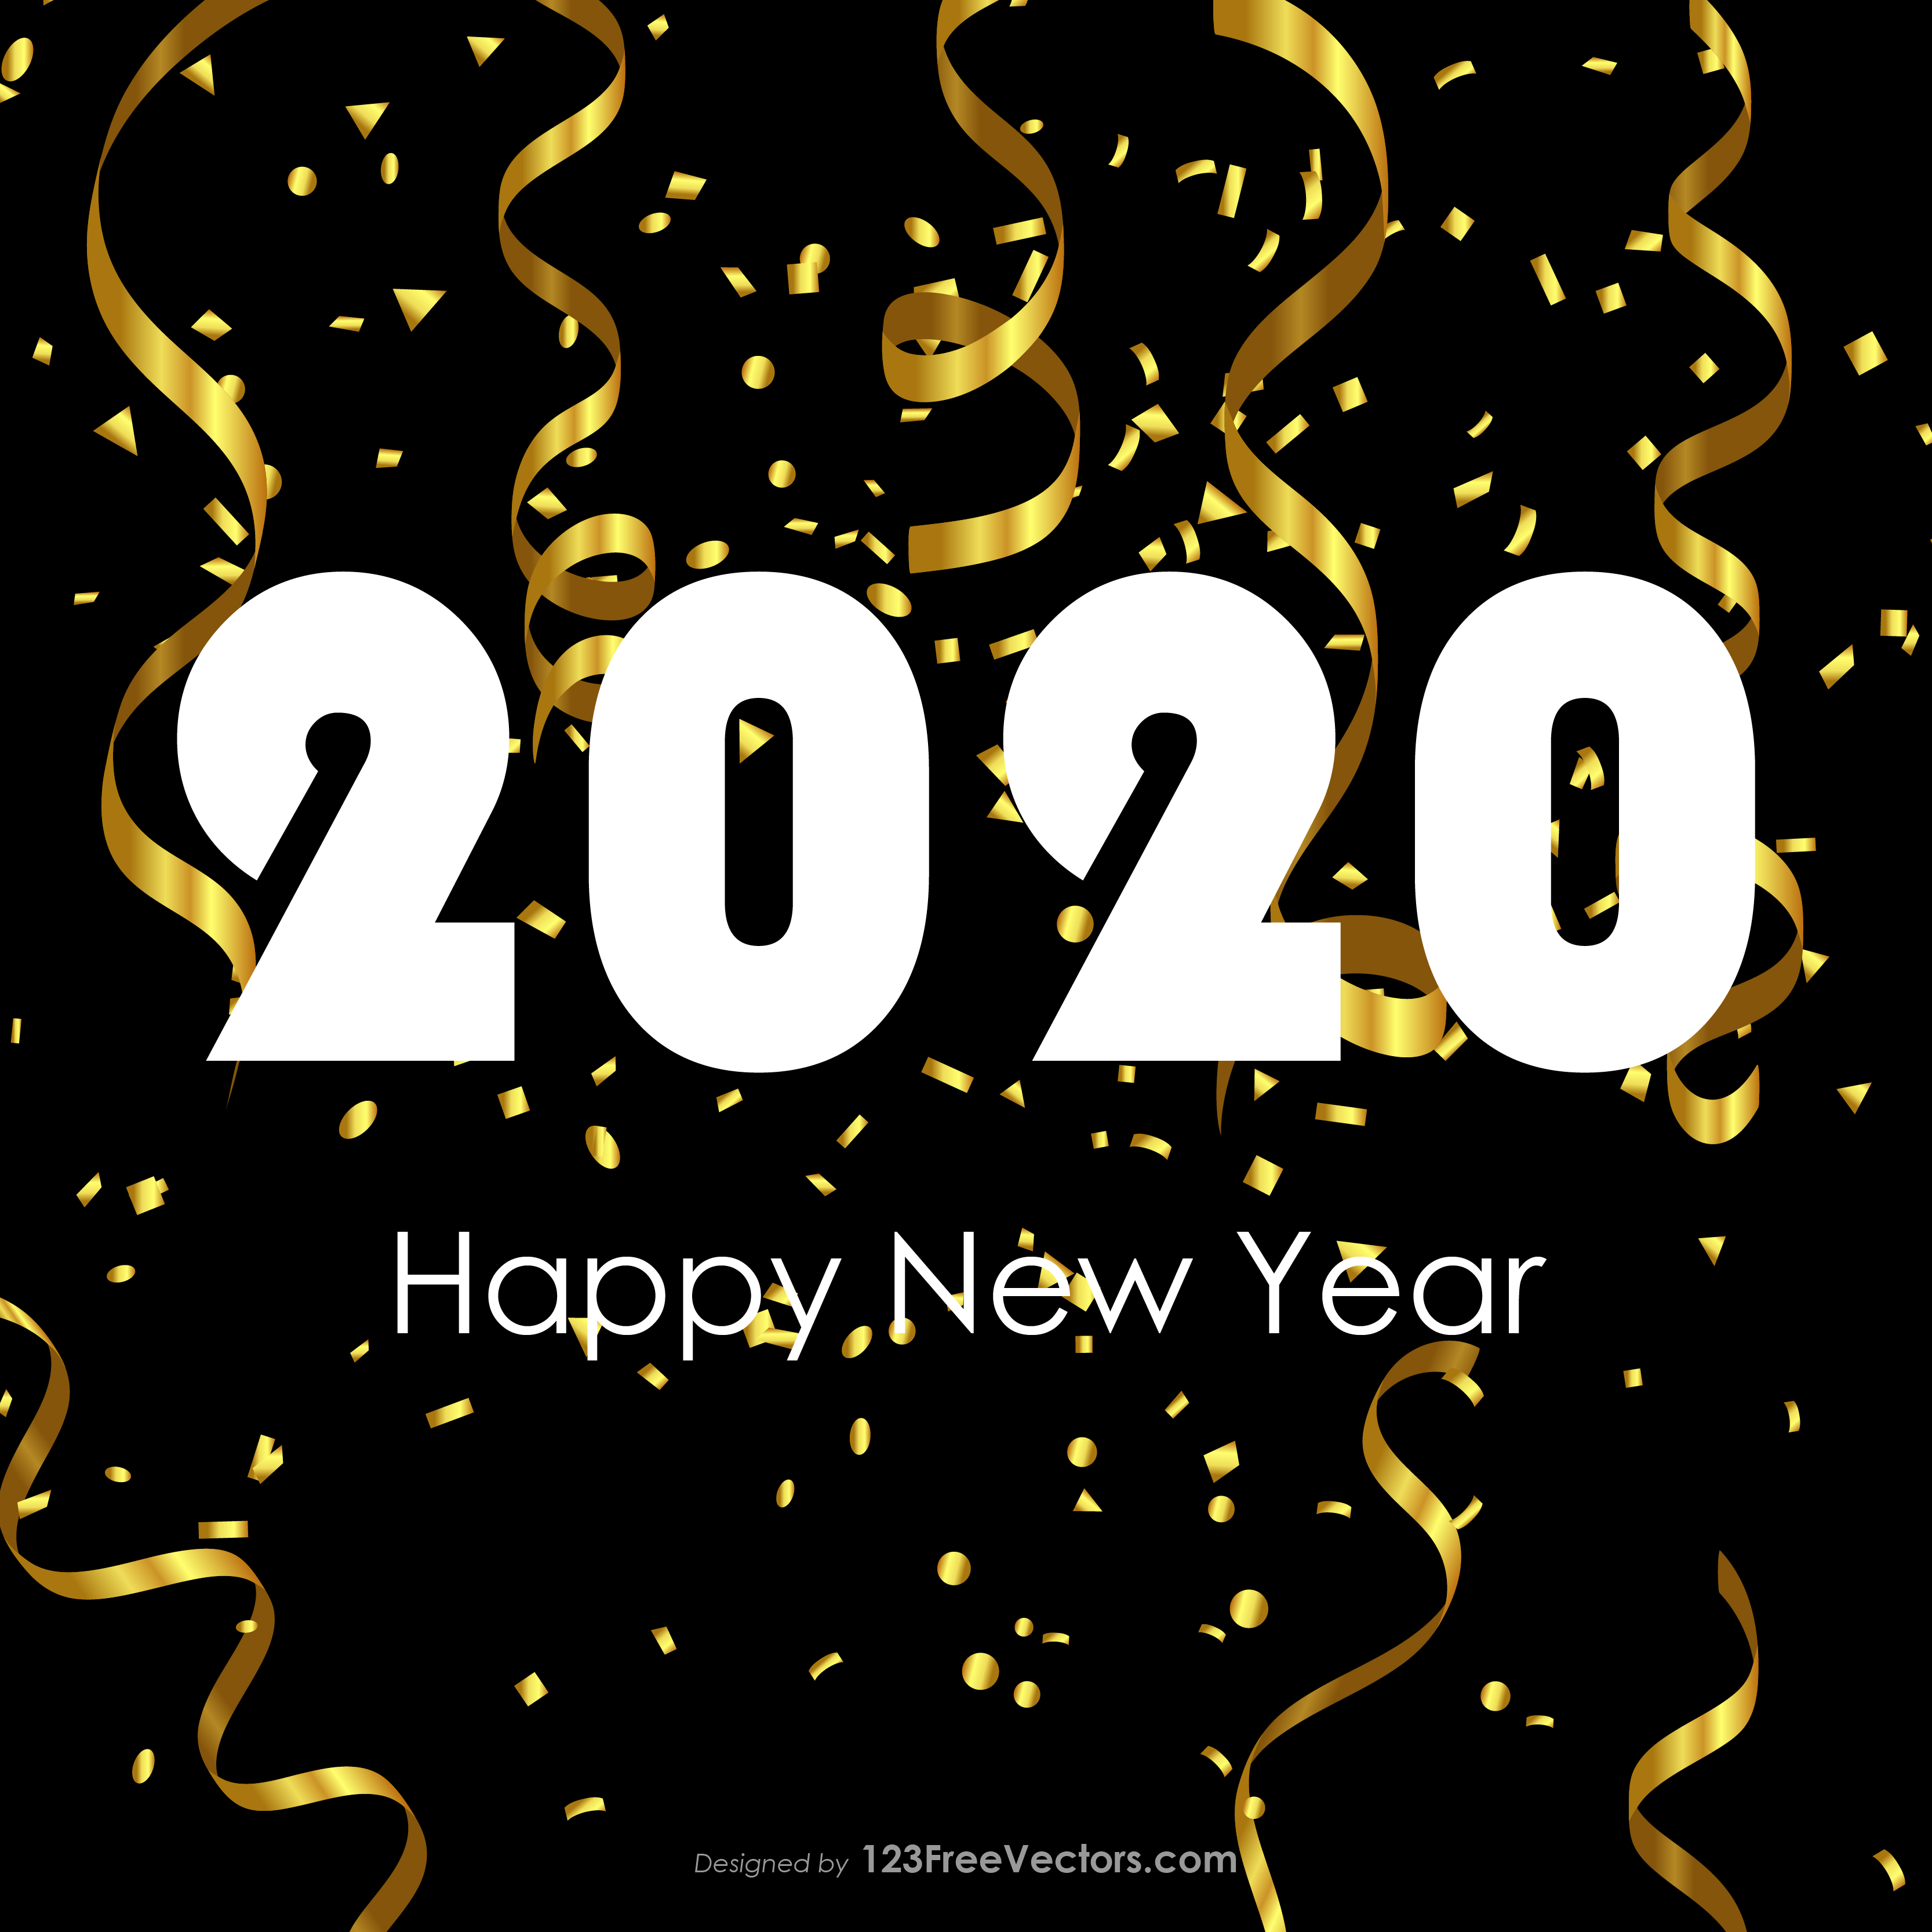 Free Happy New Year 2020 Gold Streamer And Confetti Background